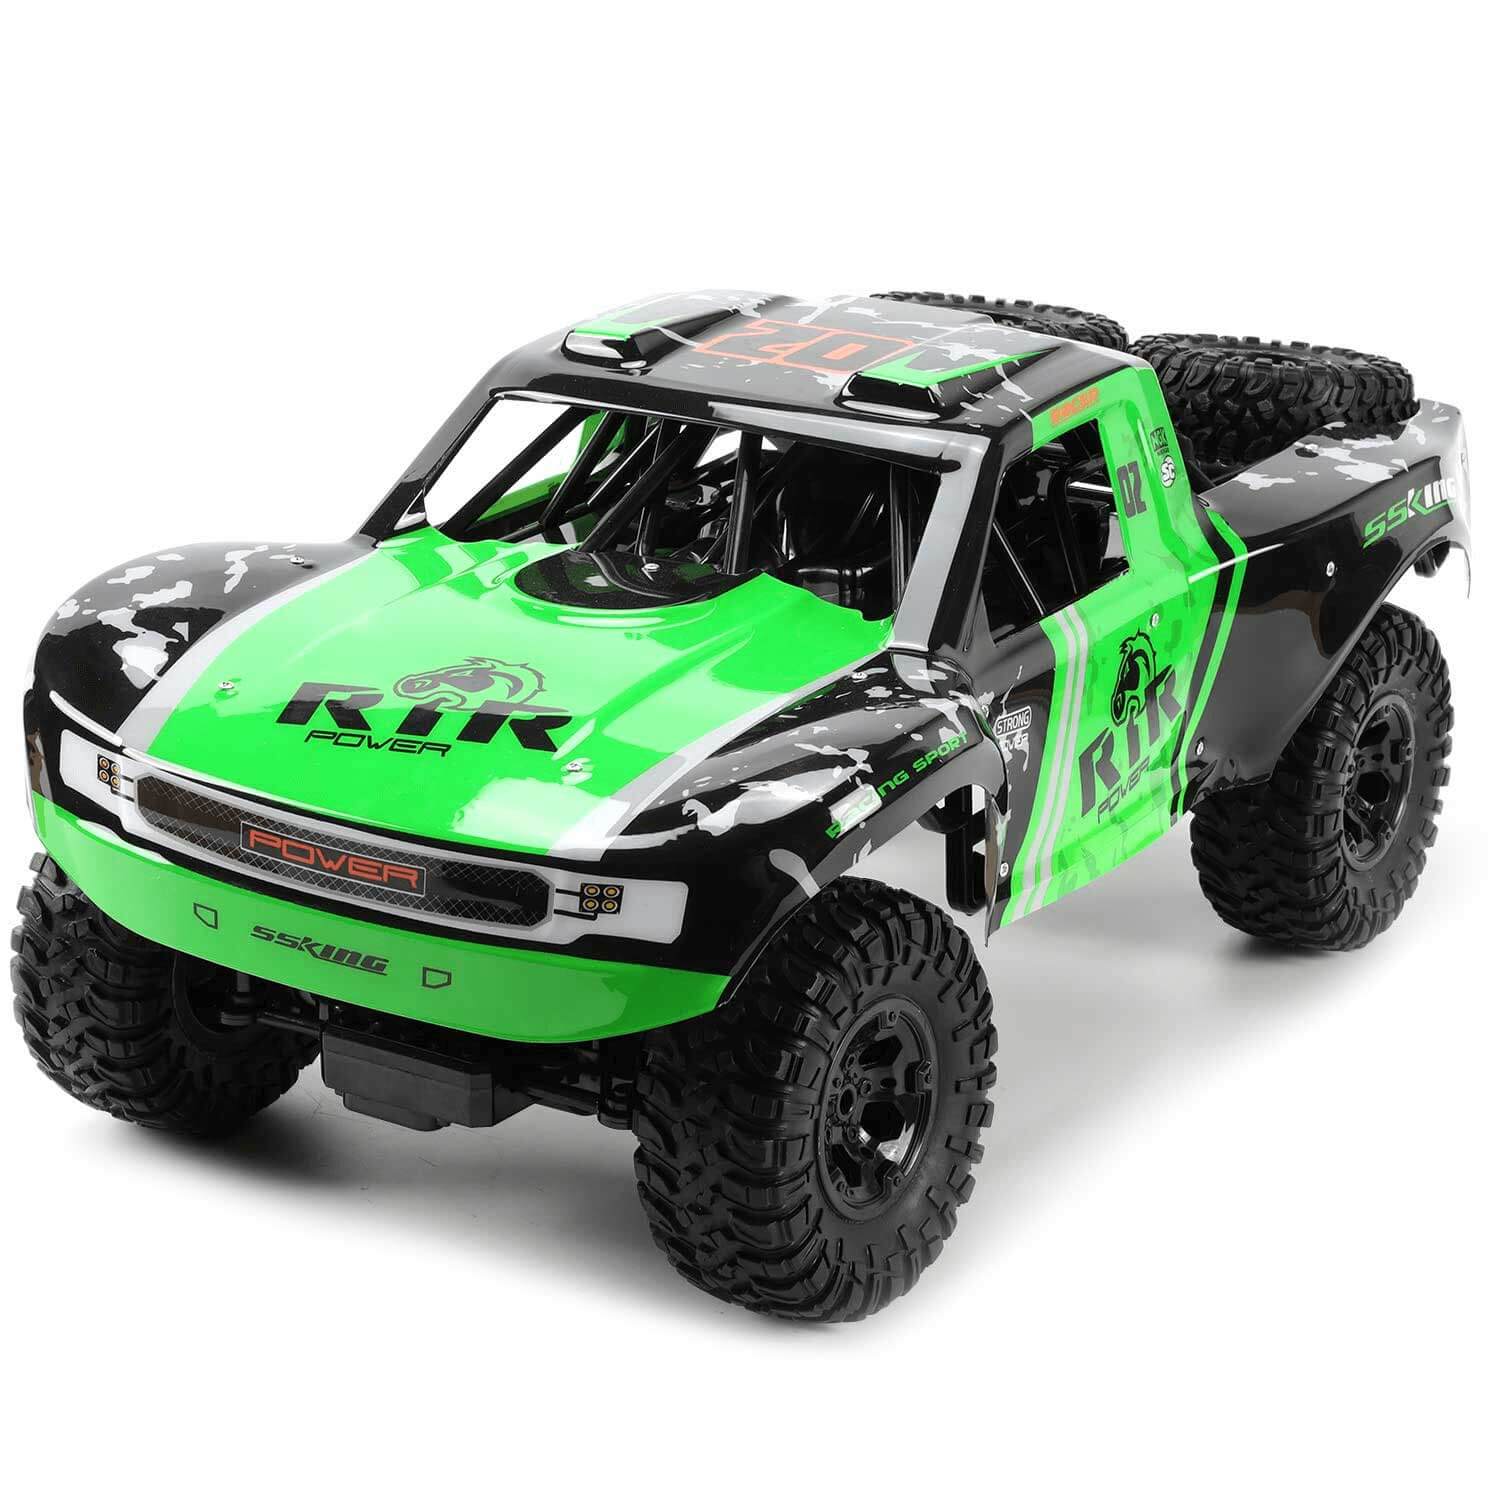 Amphibious RC Cars 1/8 Scale RC Rock Crawler Radio Controlled Monster Truck 100% Waterproof